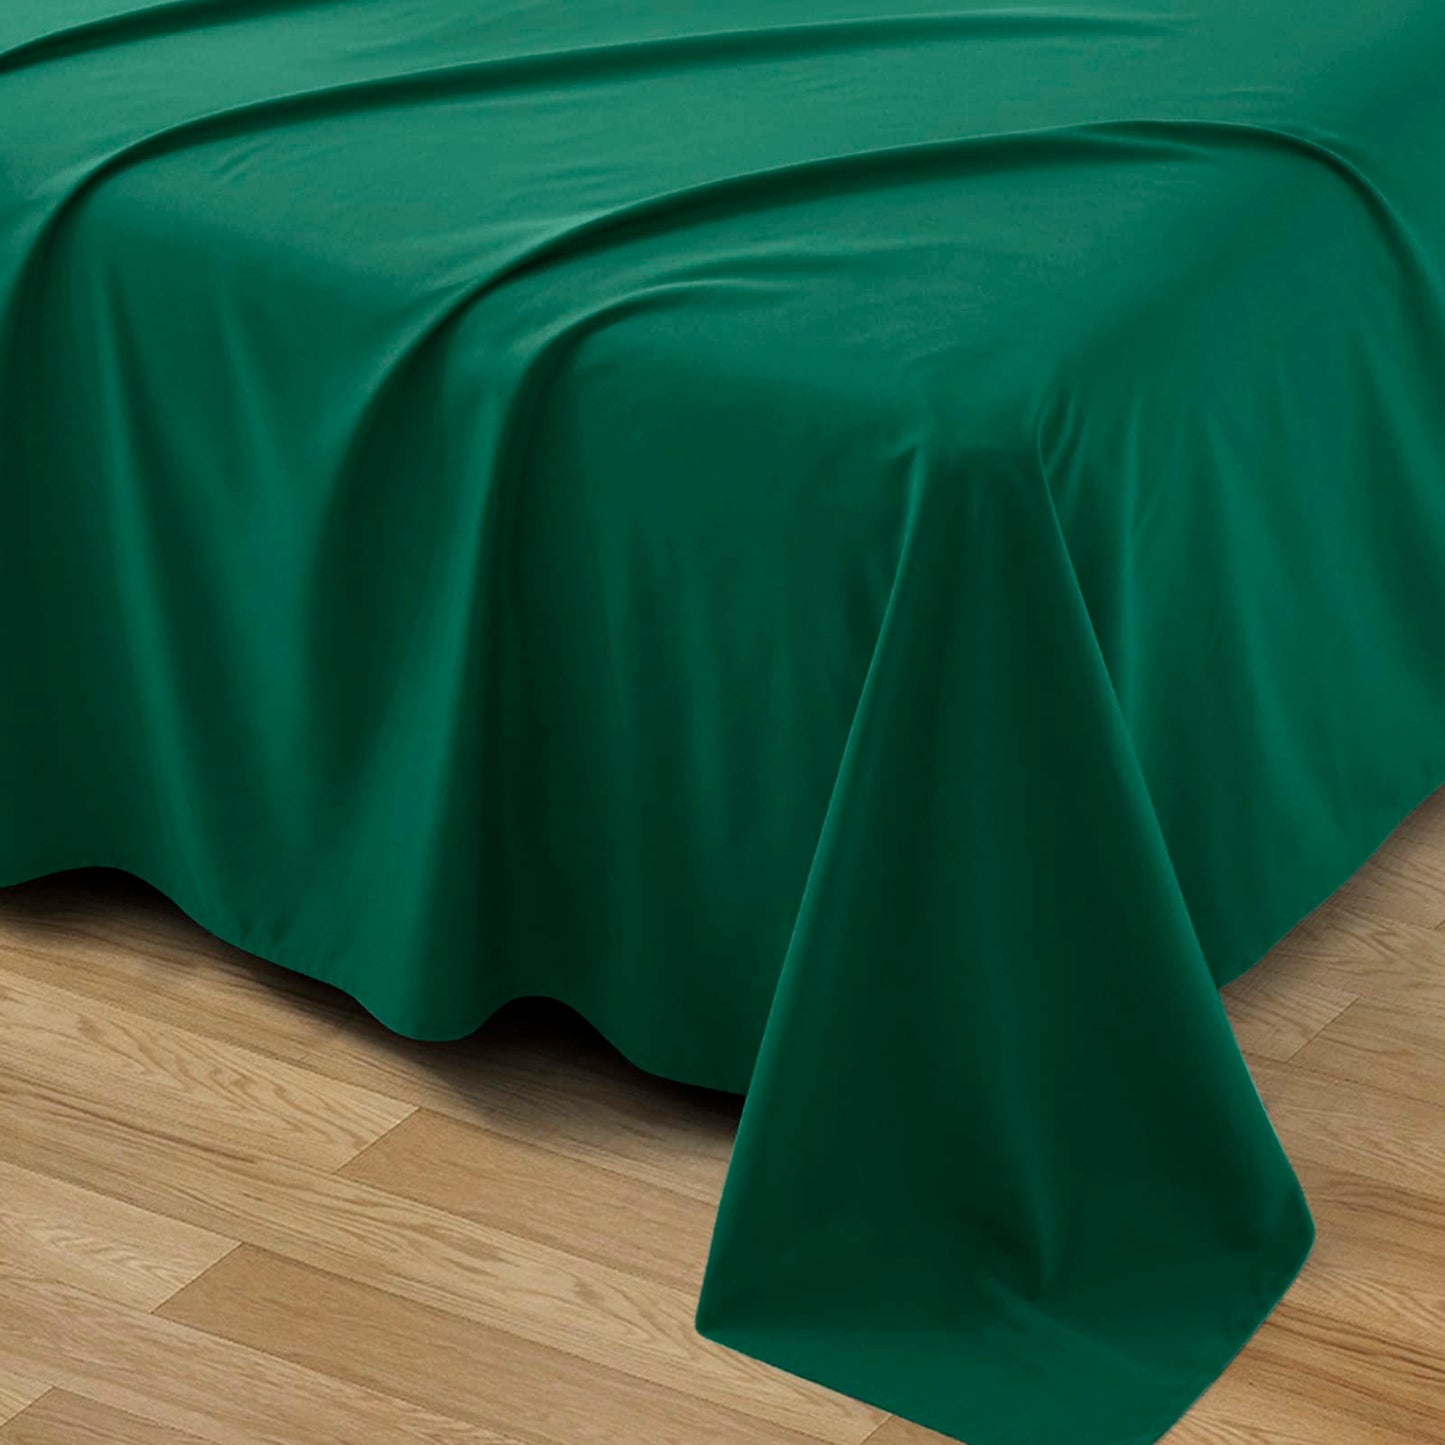 SiinvdaBZX 2 Pack Full Size Flat Sheet Only, Soft Breathable Brushed Microfiber Fabric Bed Top Sheet Only - Wrinkle, Fade Resistant - Forest Green